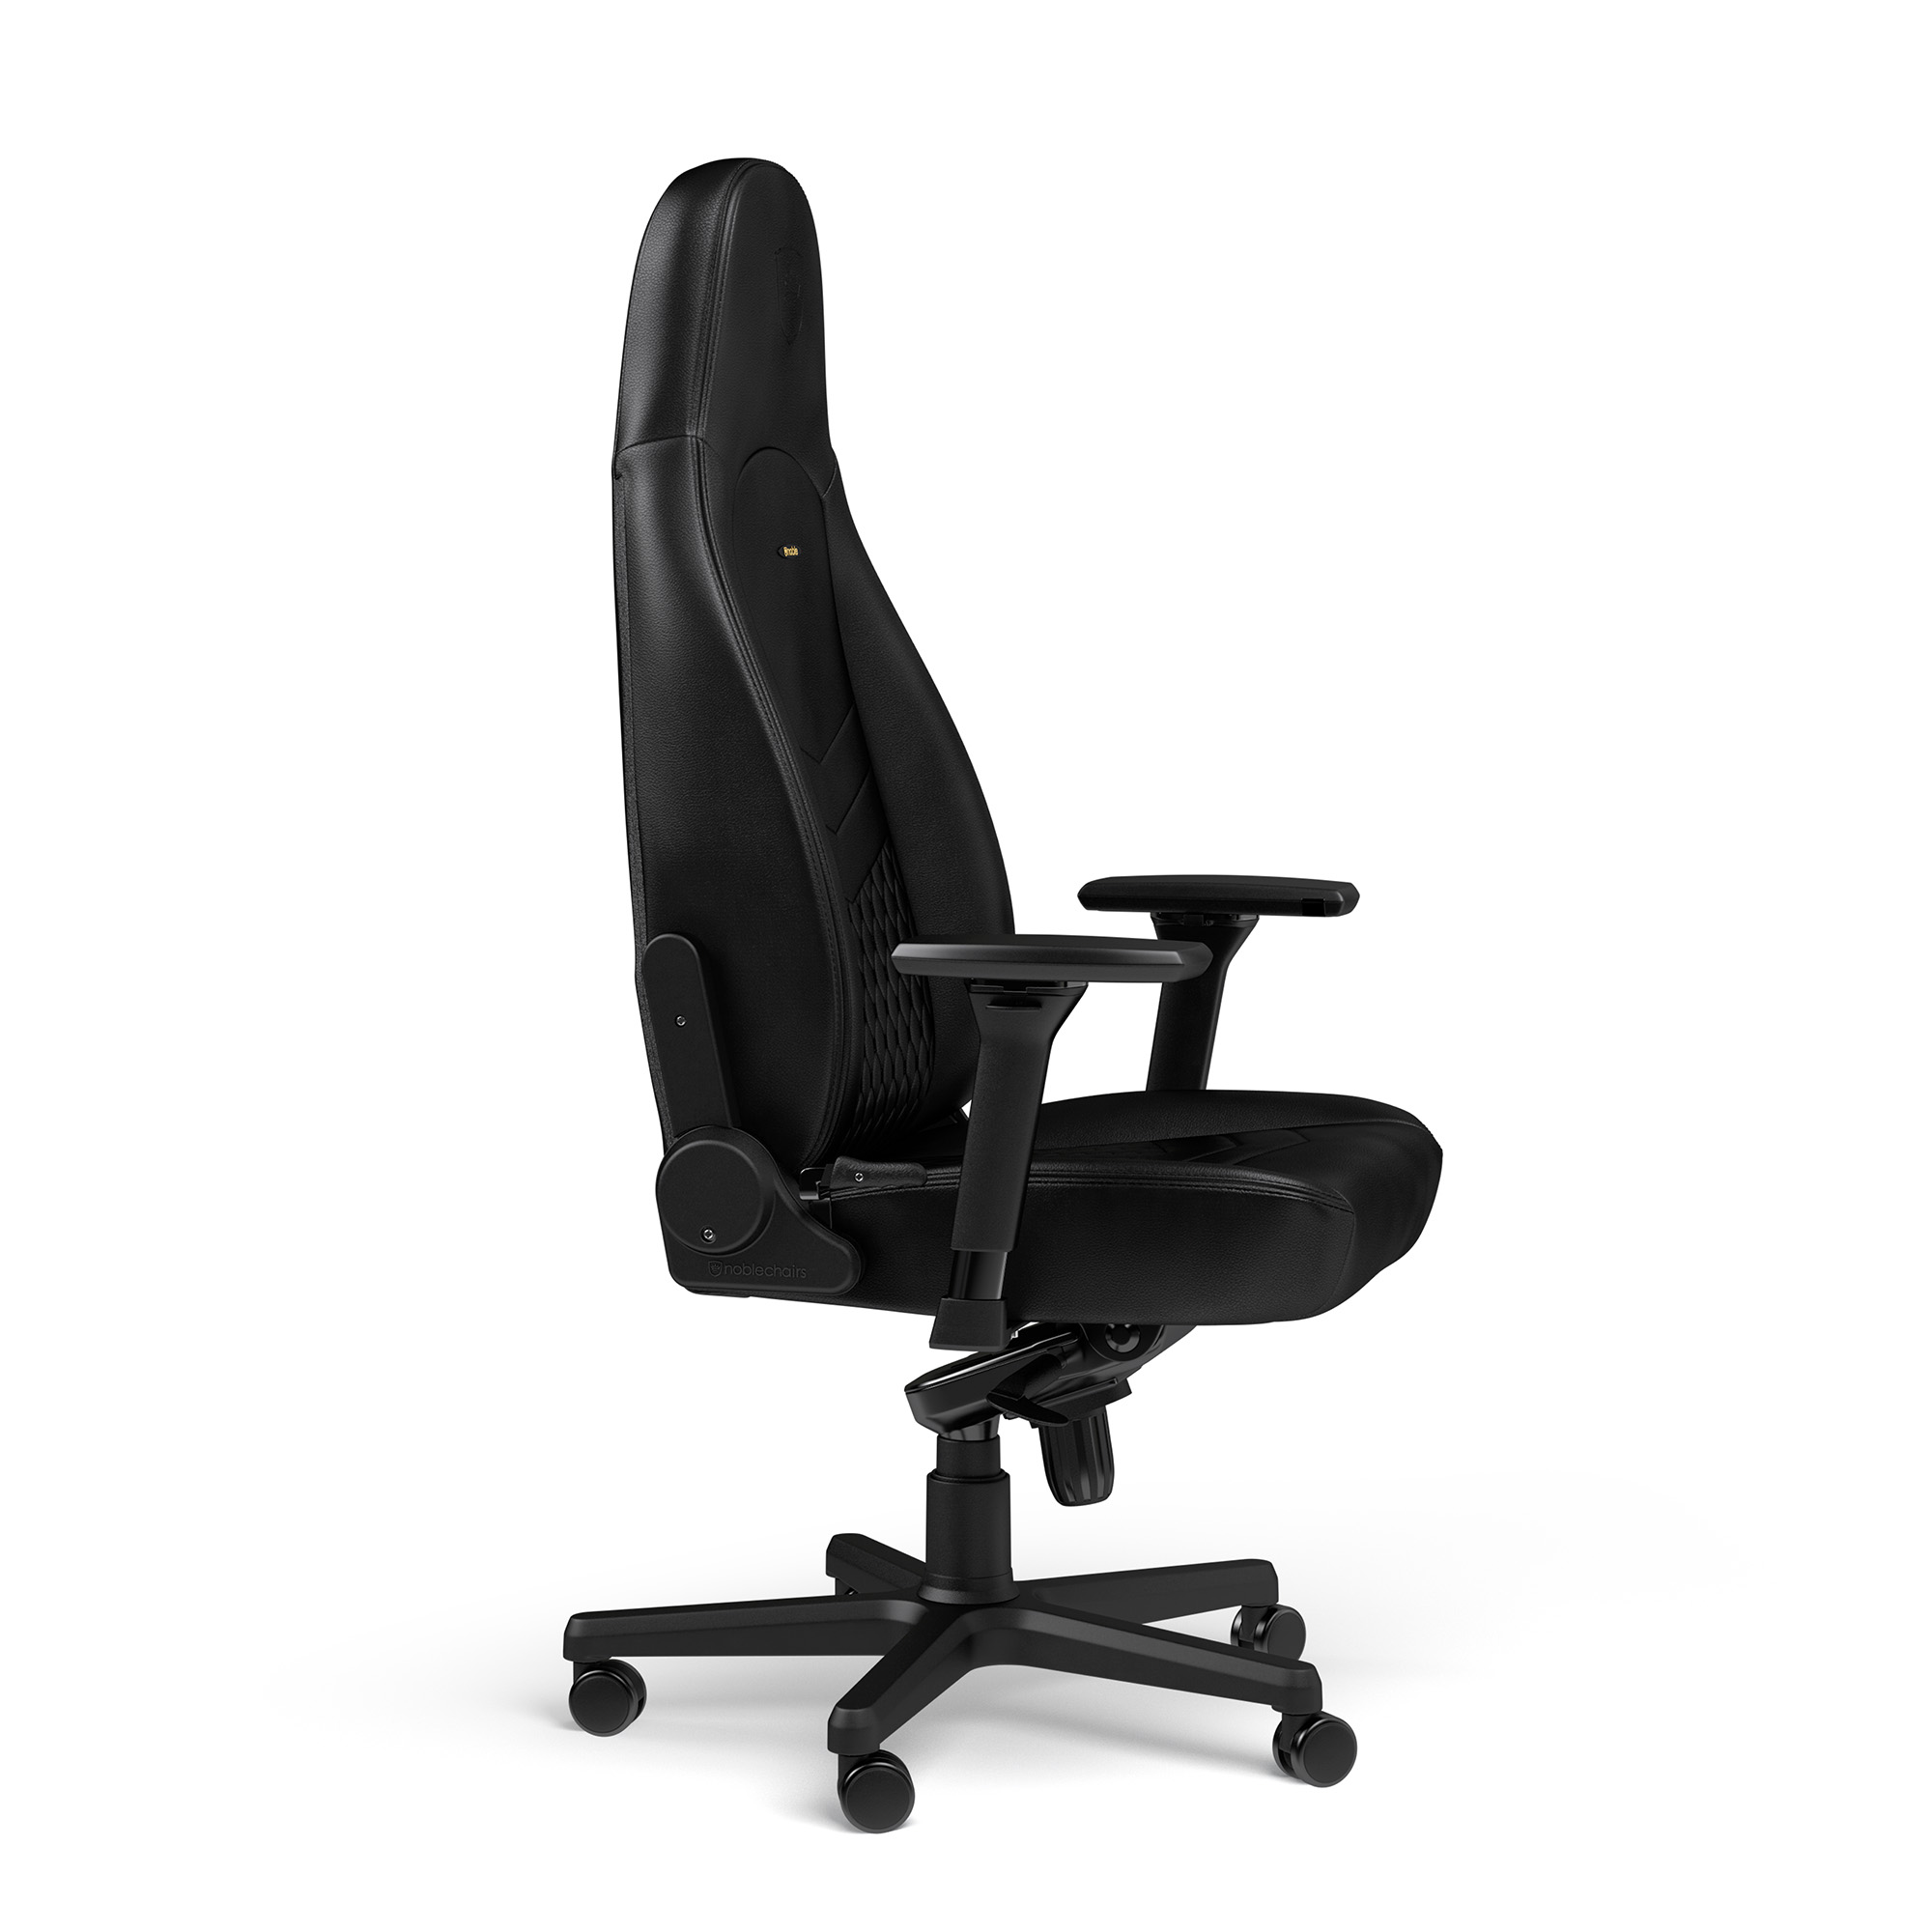 noblechairs - noblechairs ICON Top Grain Leather Gaming Chair - Black